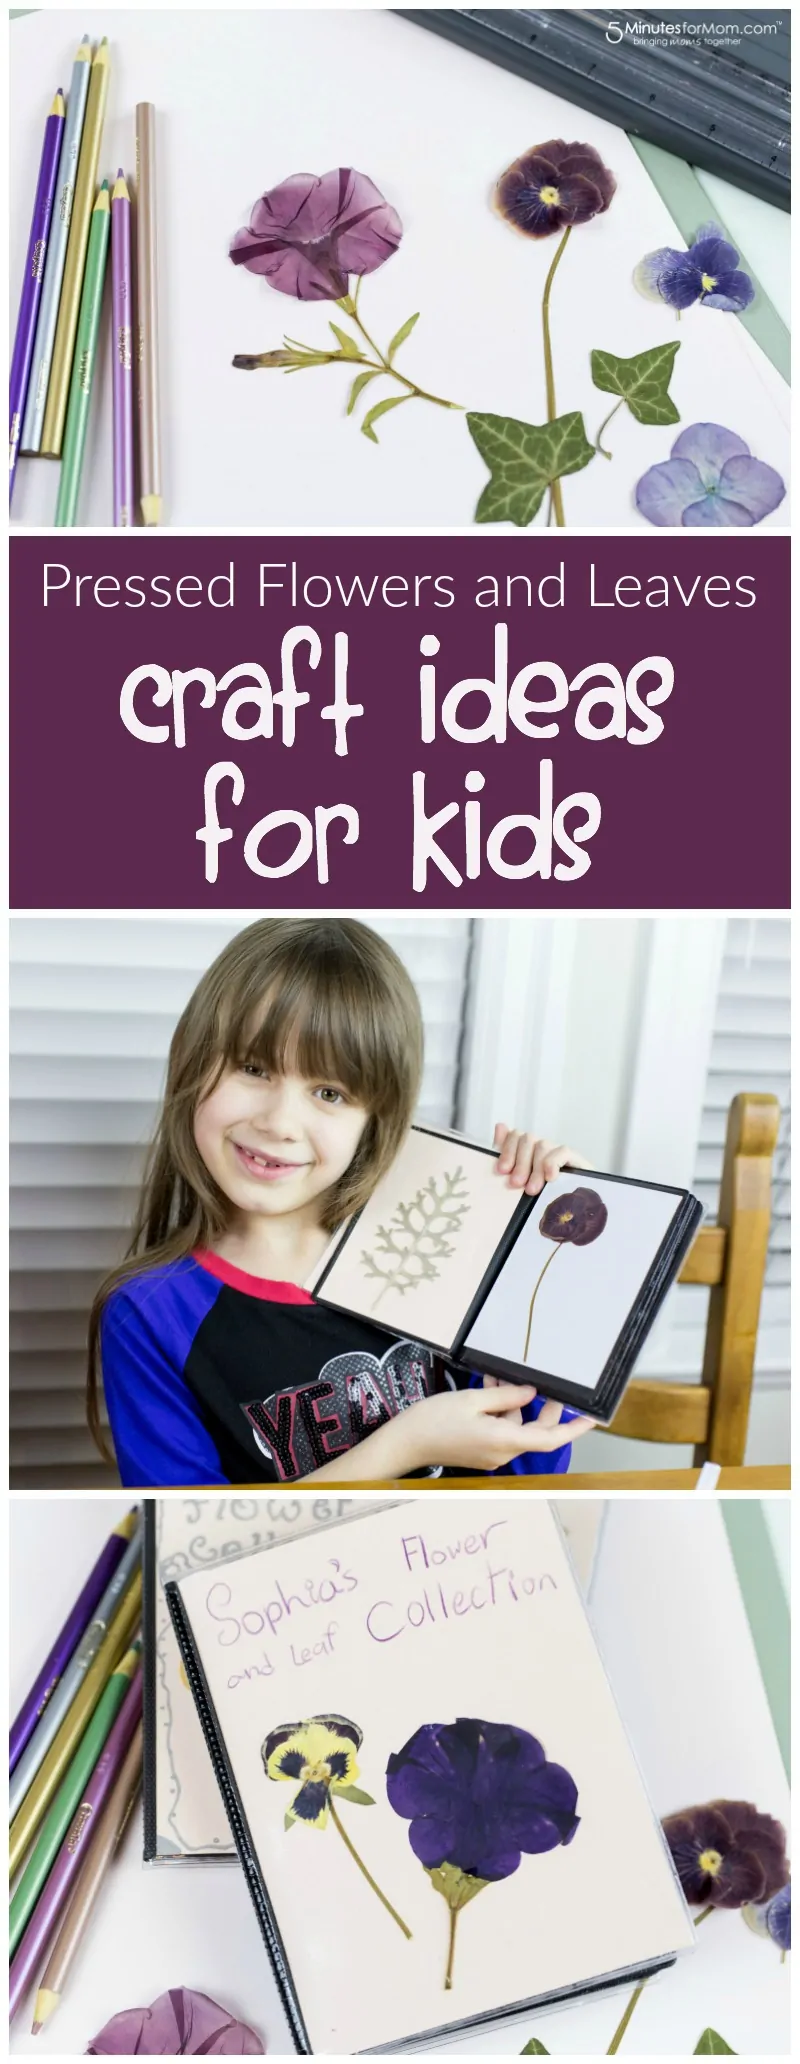 Pressed flowers and leaves - Craft ideas for Kids